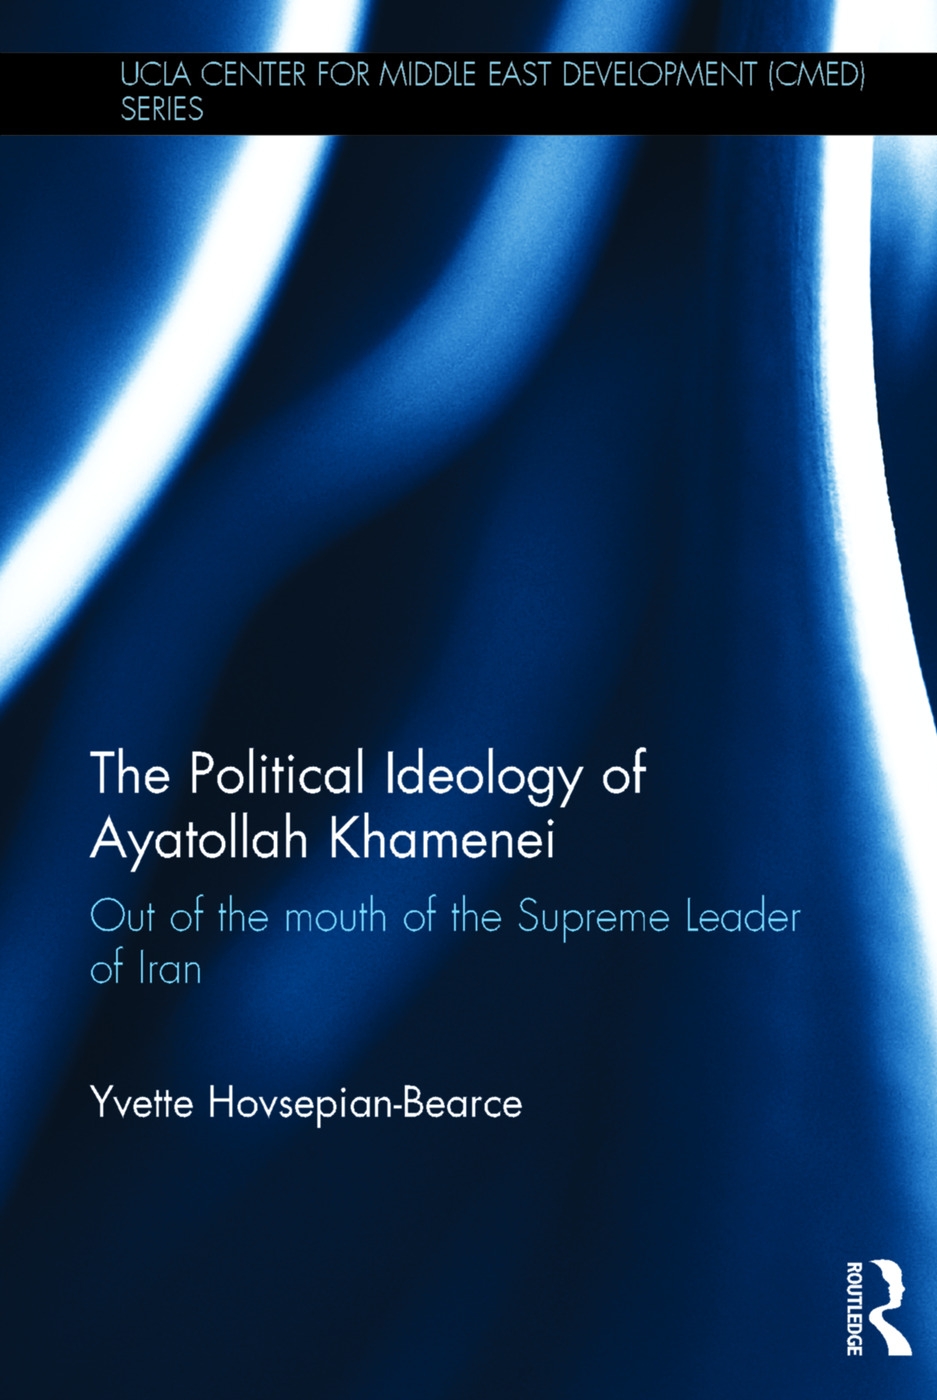 The Political Ideology of Ayatollah Khamenei: Out of the mouth of the Supreme Leader of Iran